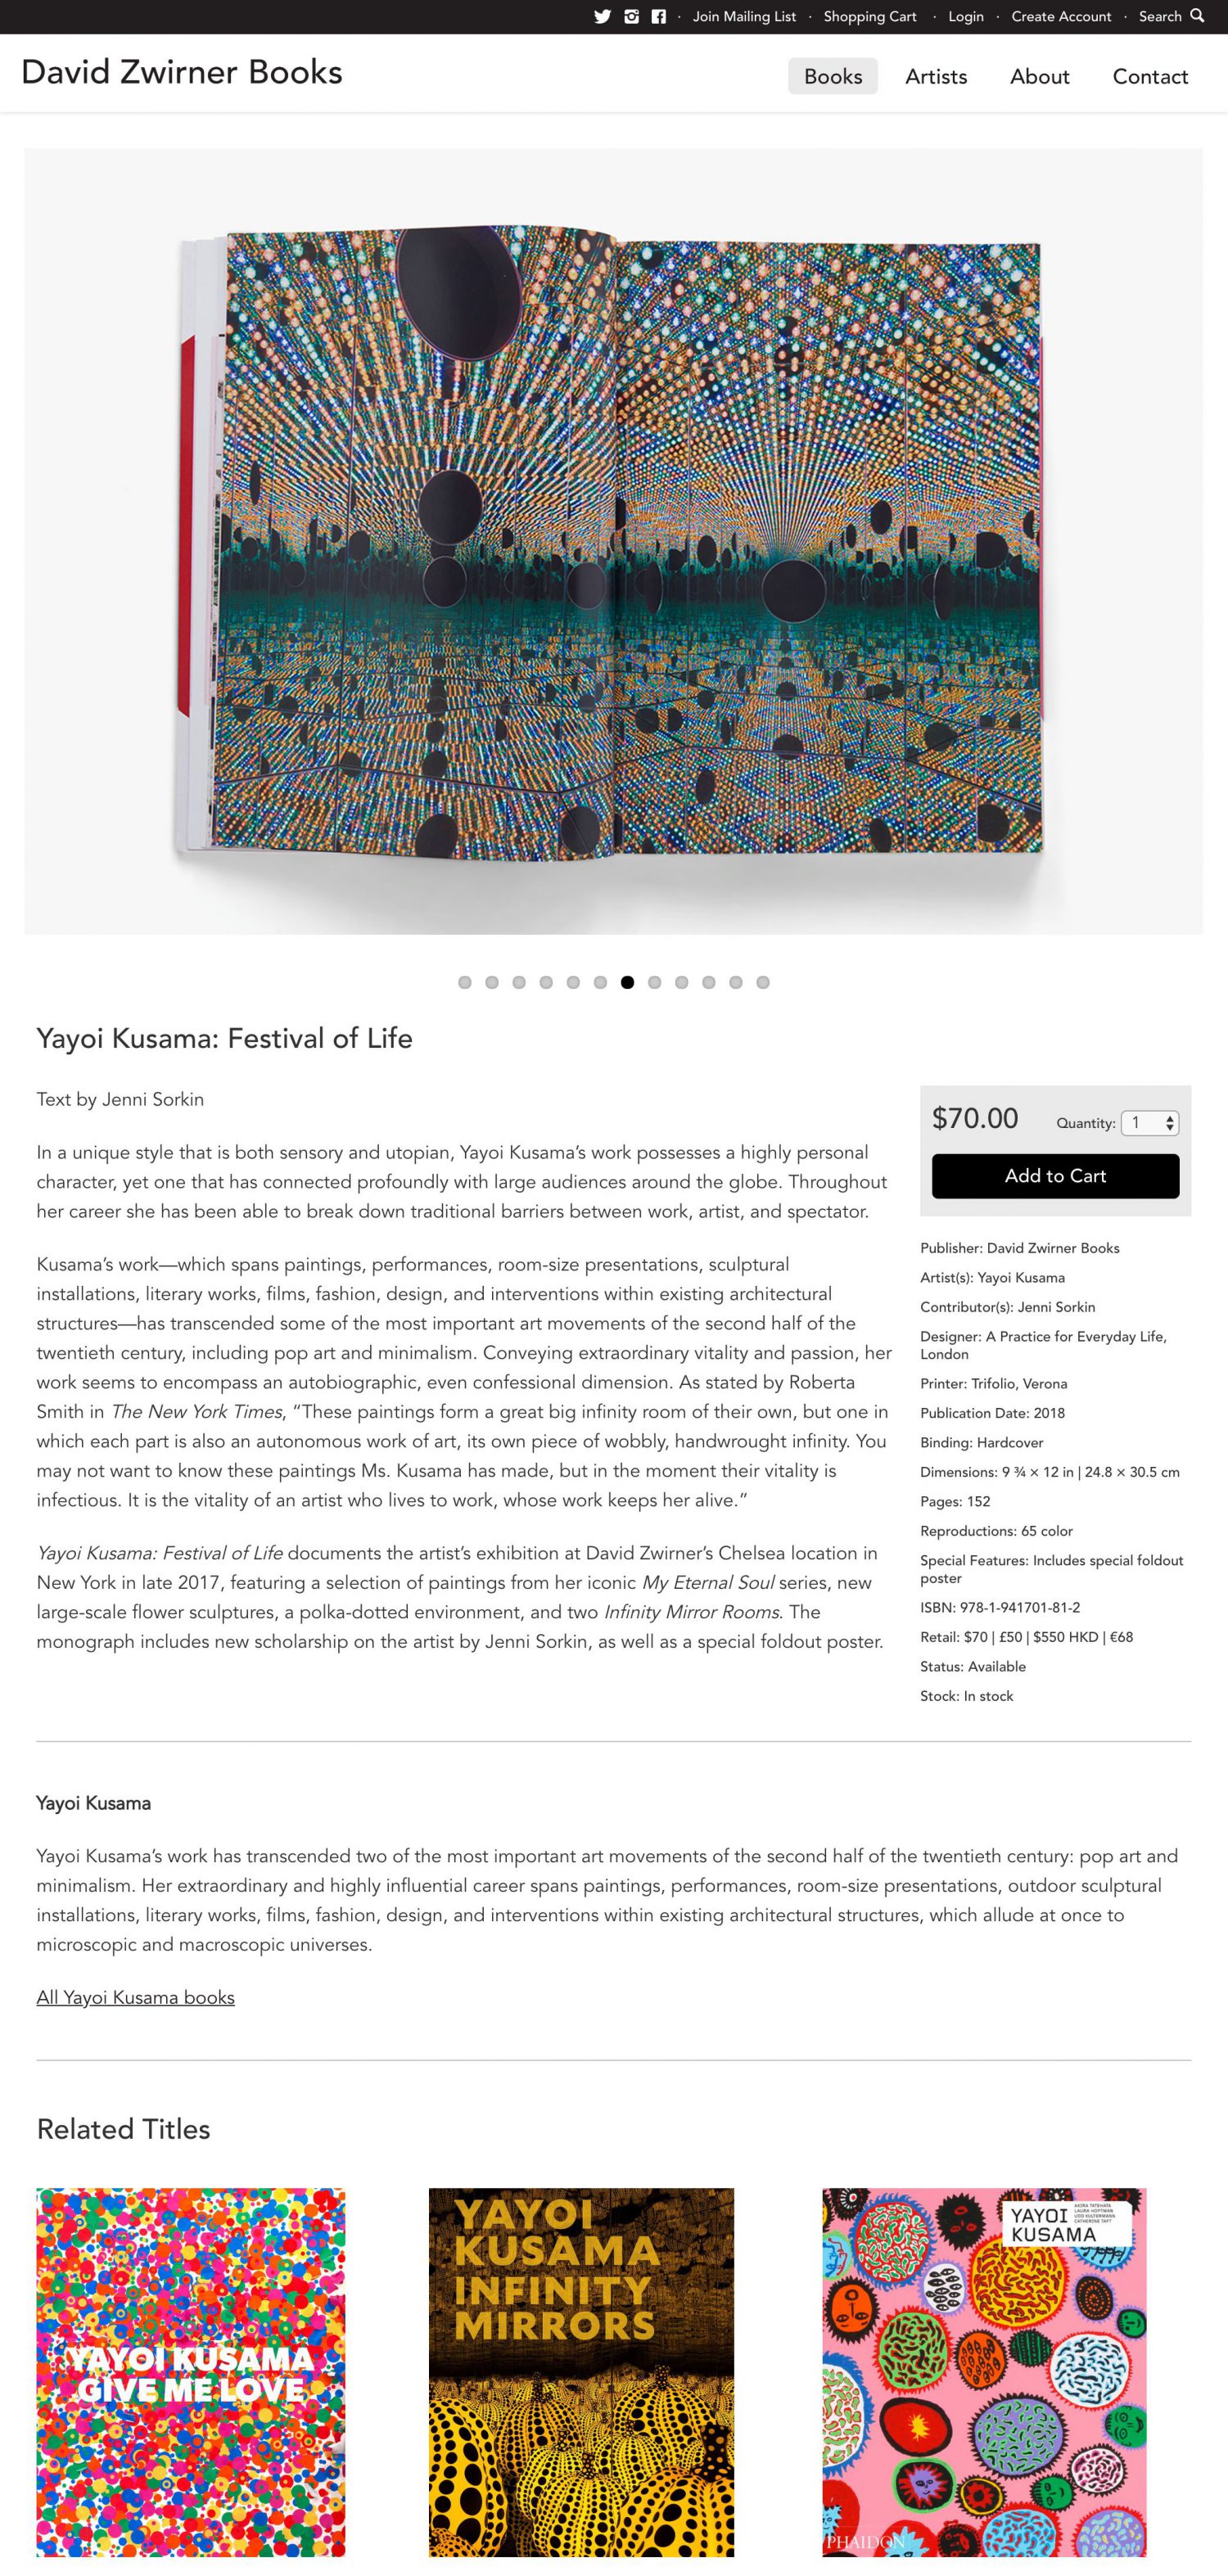 Screenshot of the David Zwirner Books website's books detail page